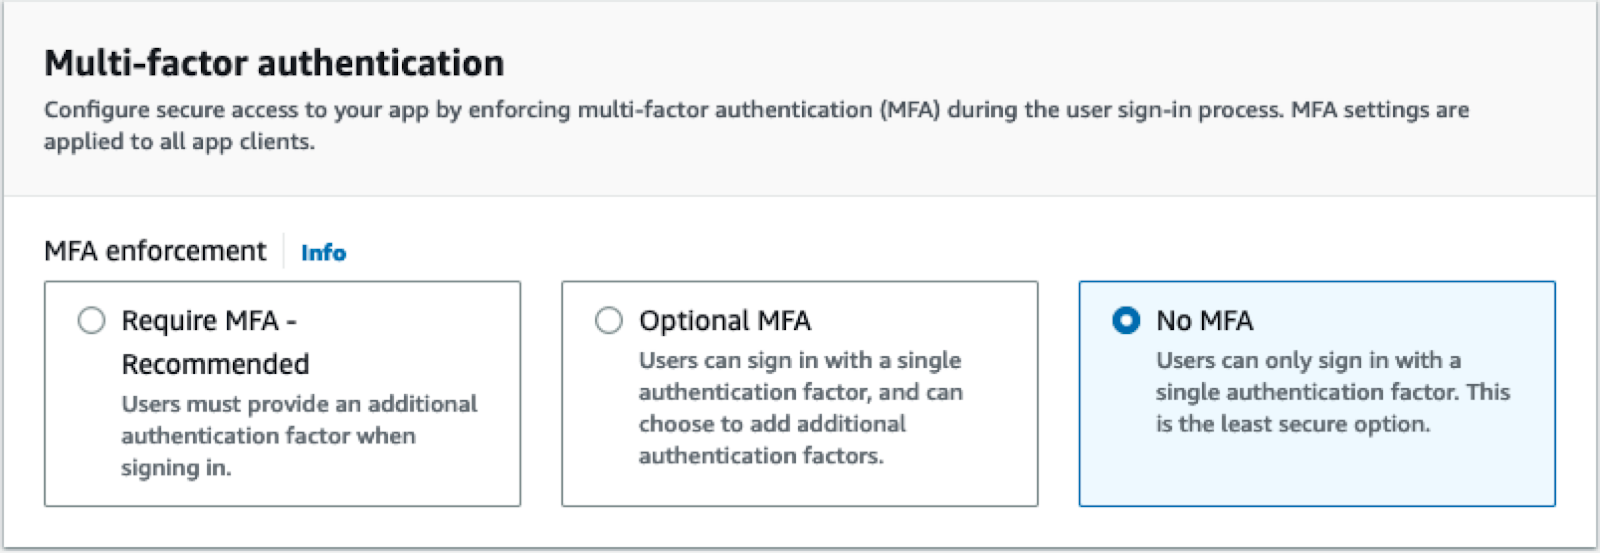 Disabling Multi-Factor Authentication for test purposes only. 